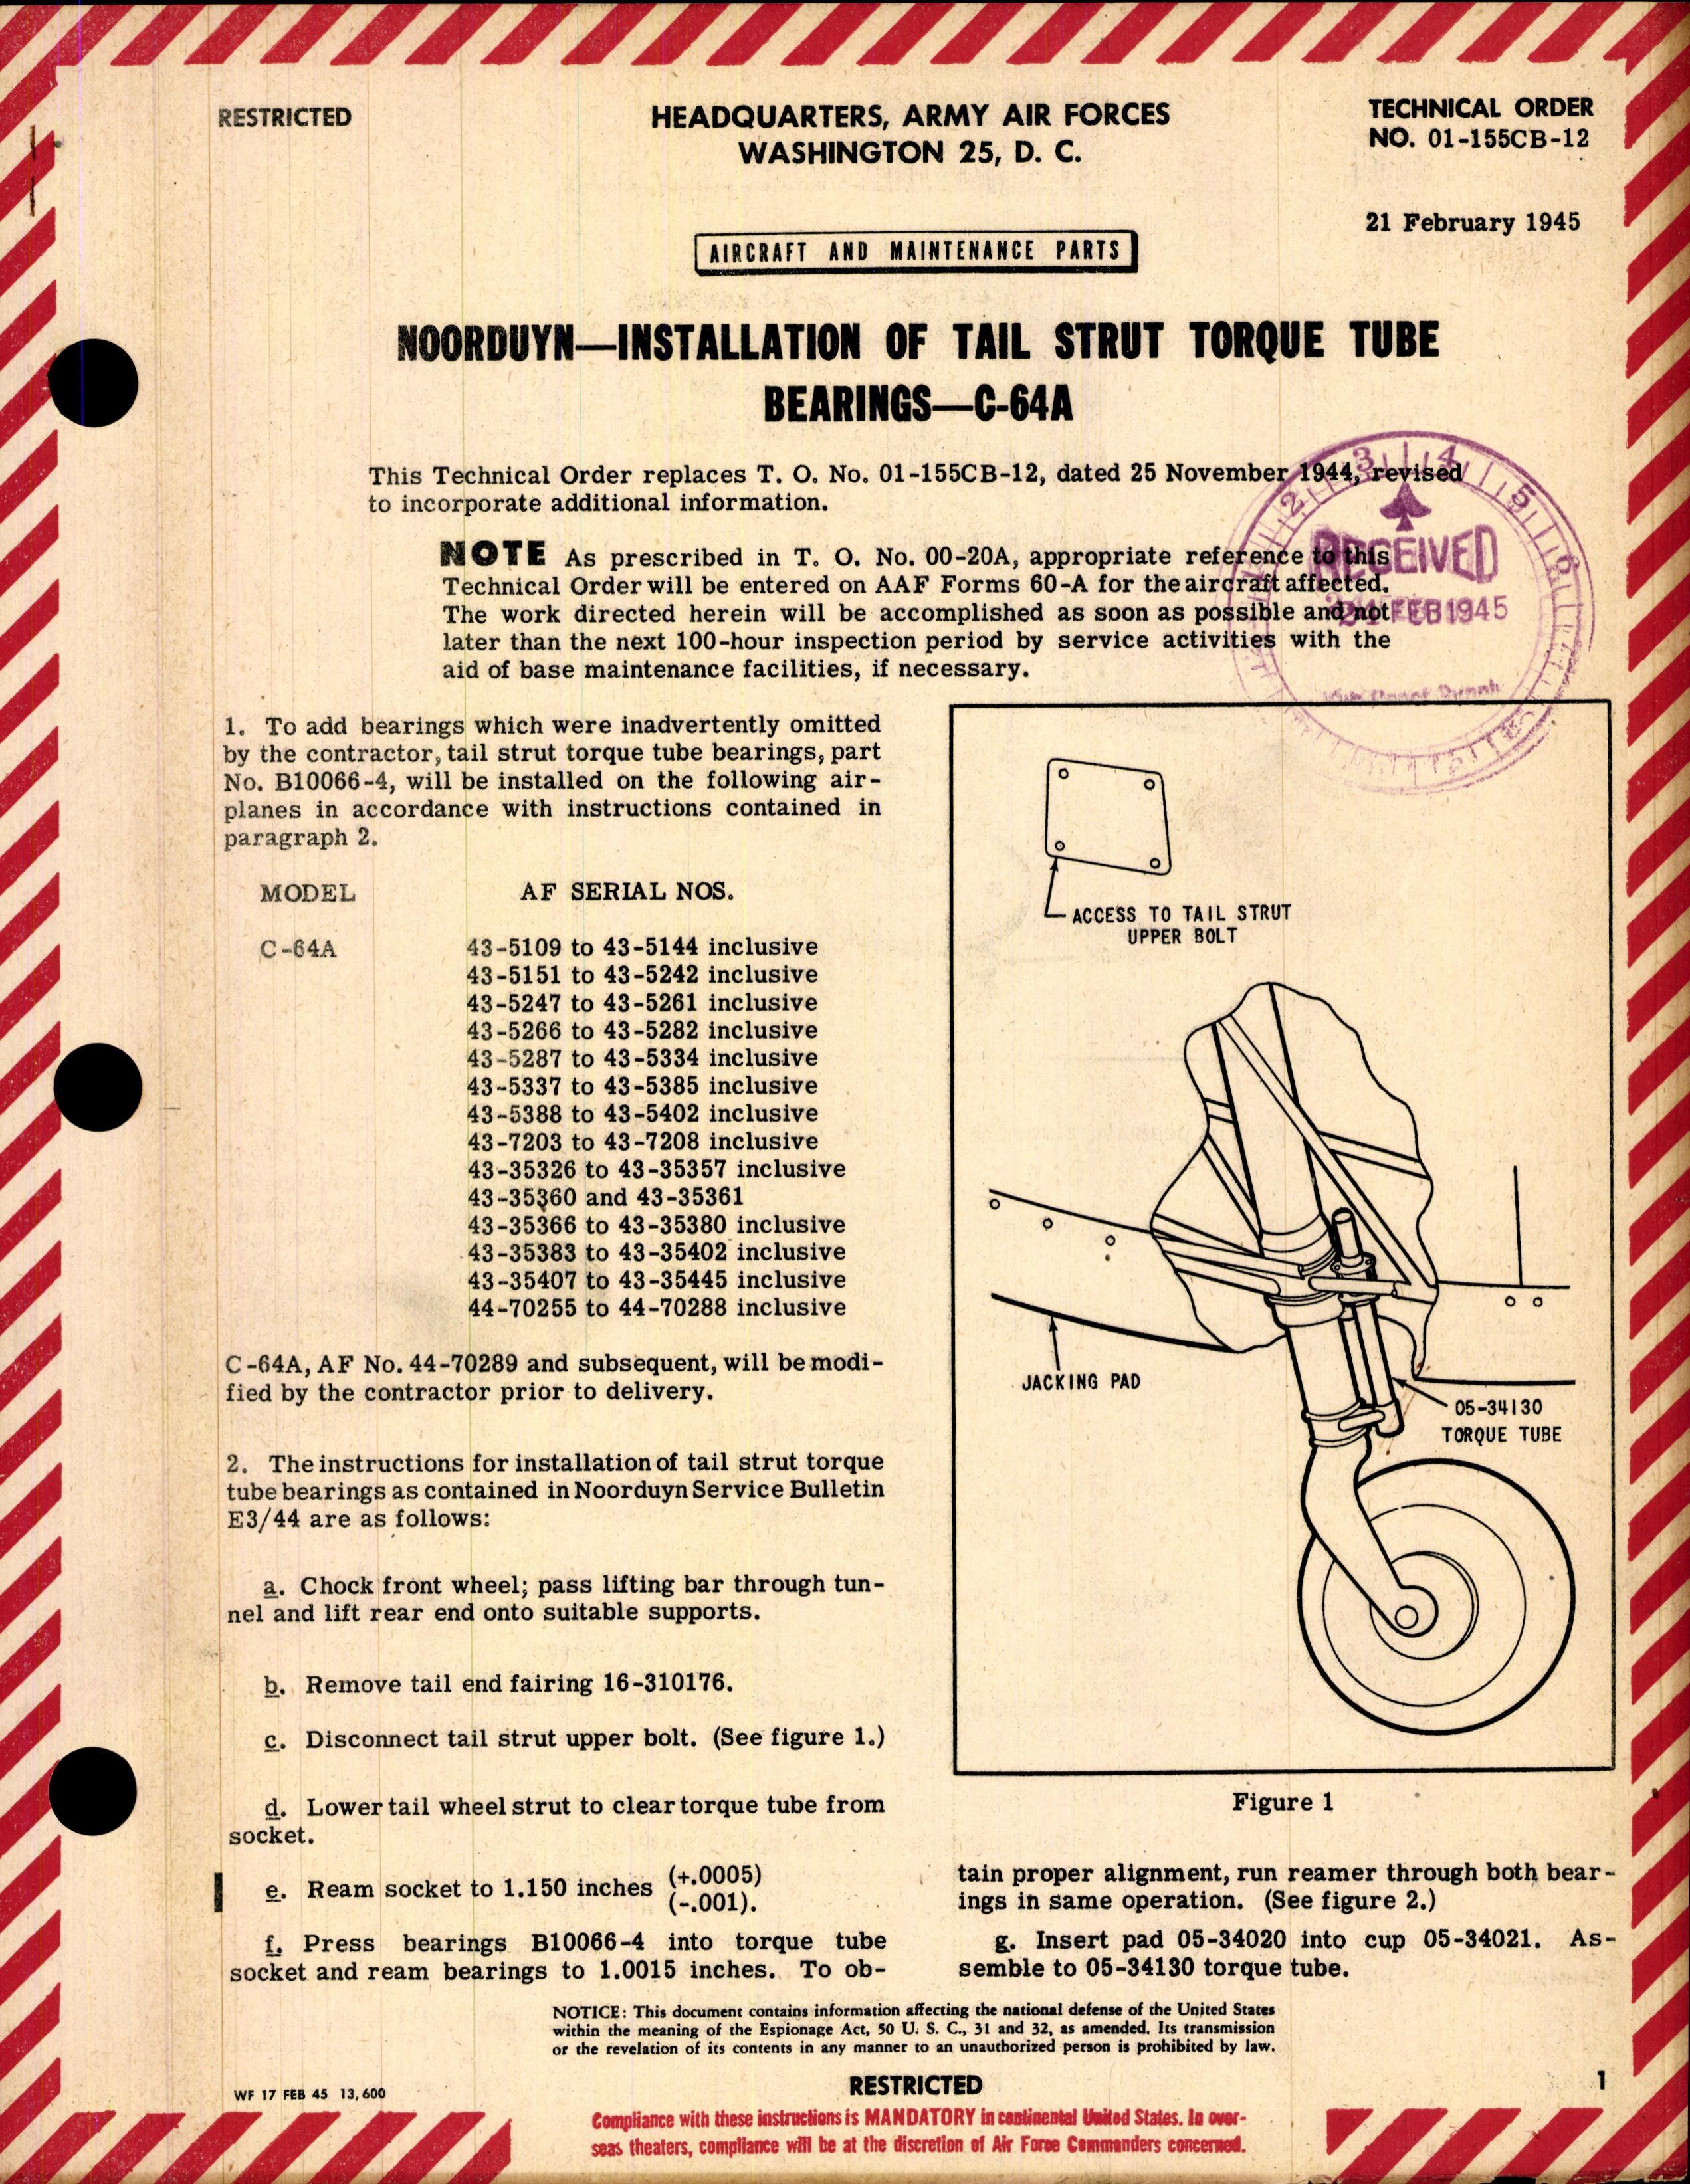 Sample page 1 from AirCorps Library document: Installation of Tail Wheel Strut Torque Tube Bearings for C-64A